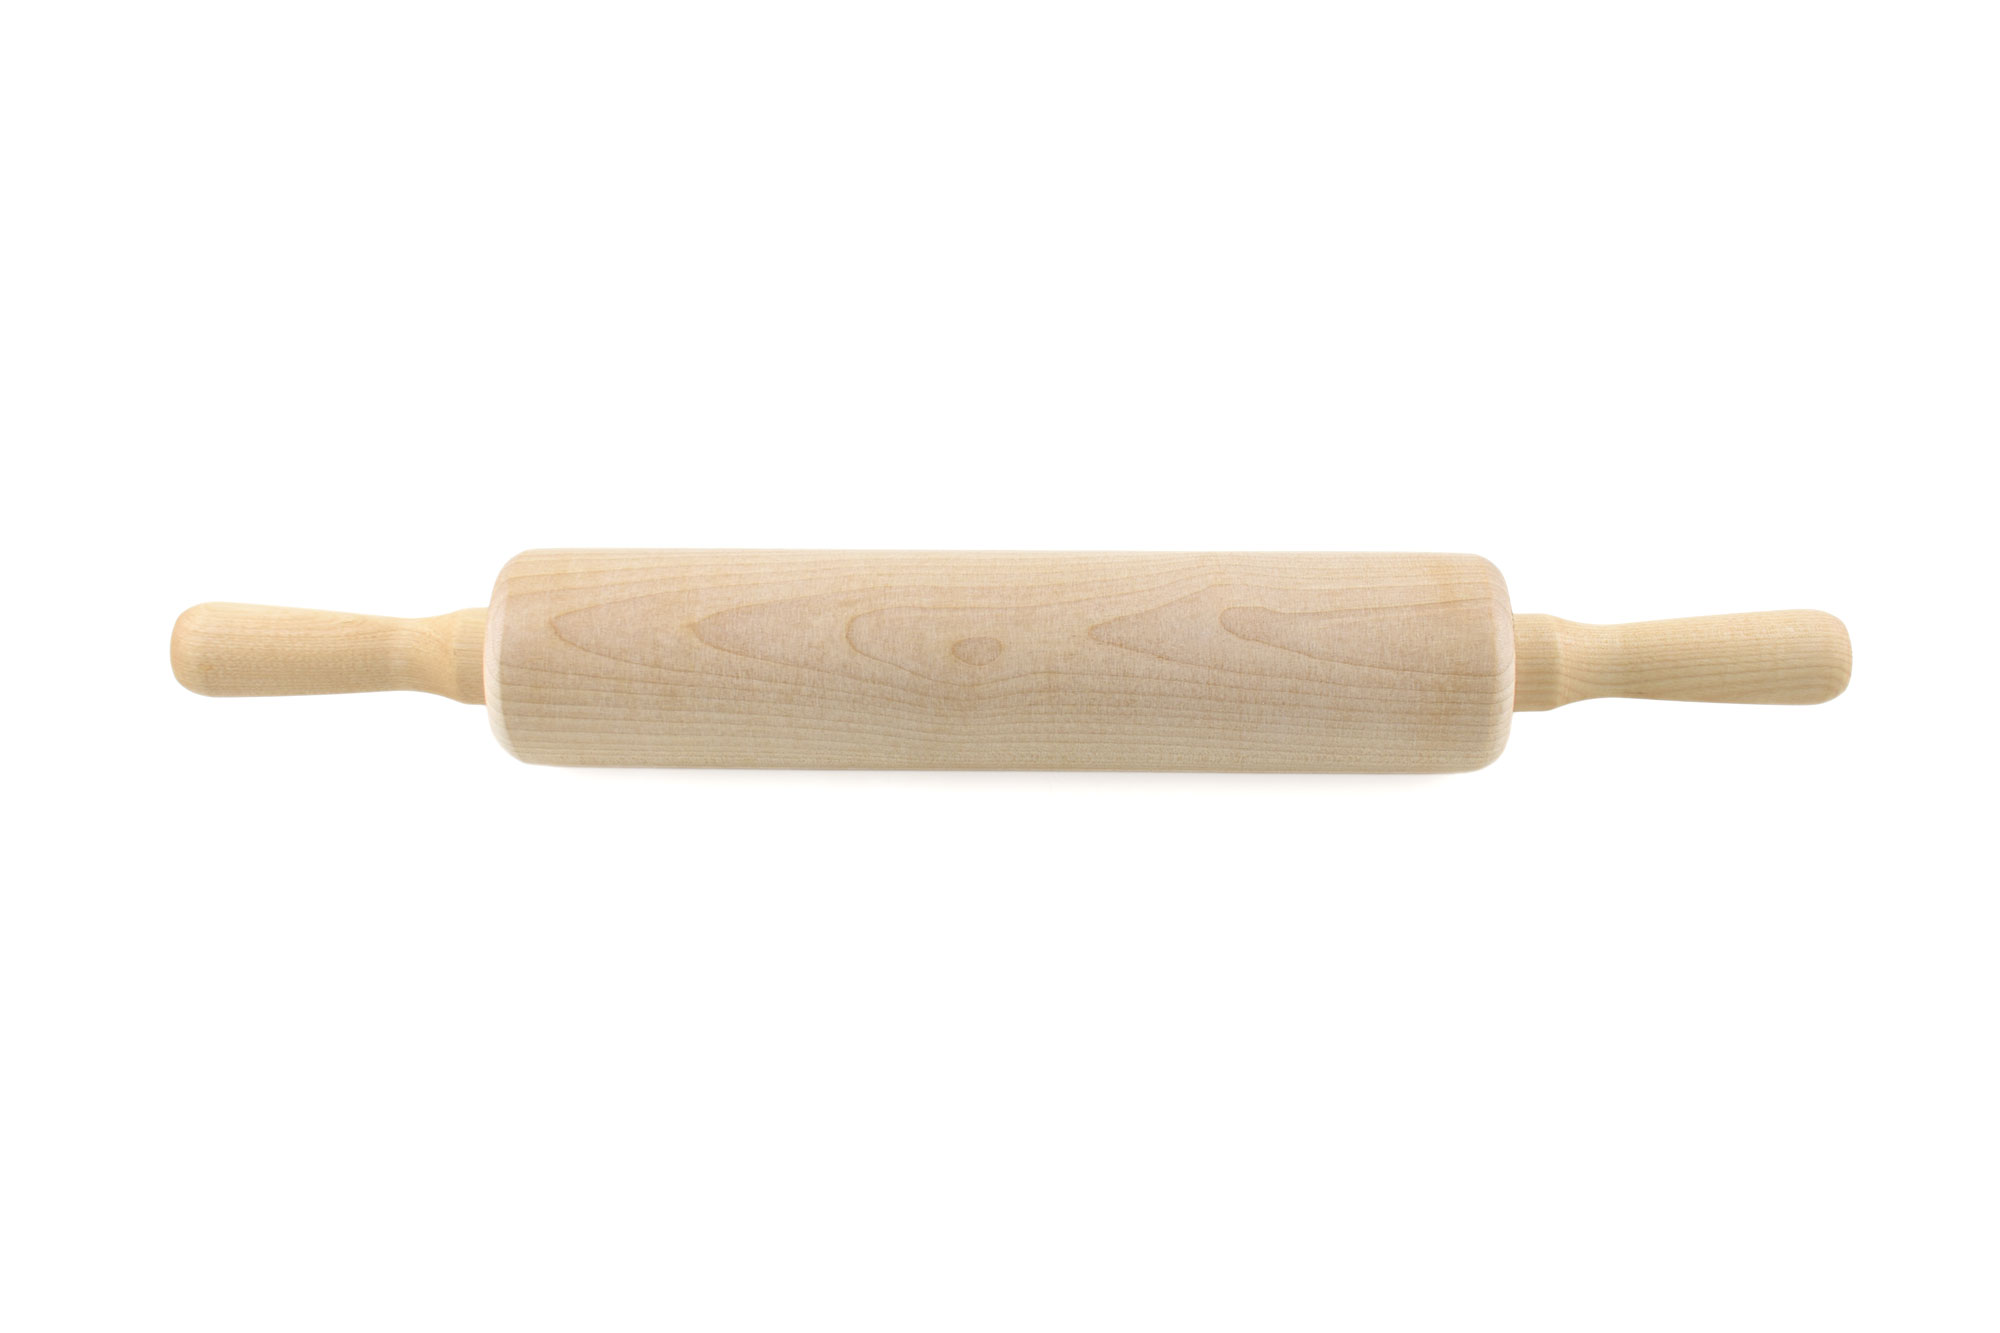 Hard maple 10 inch rolling pin